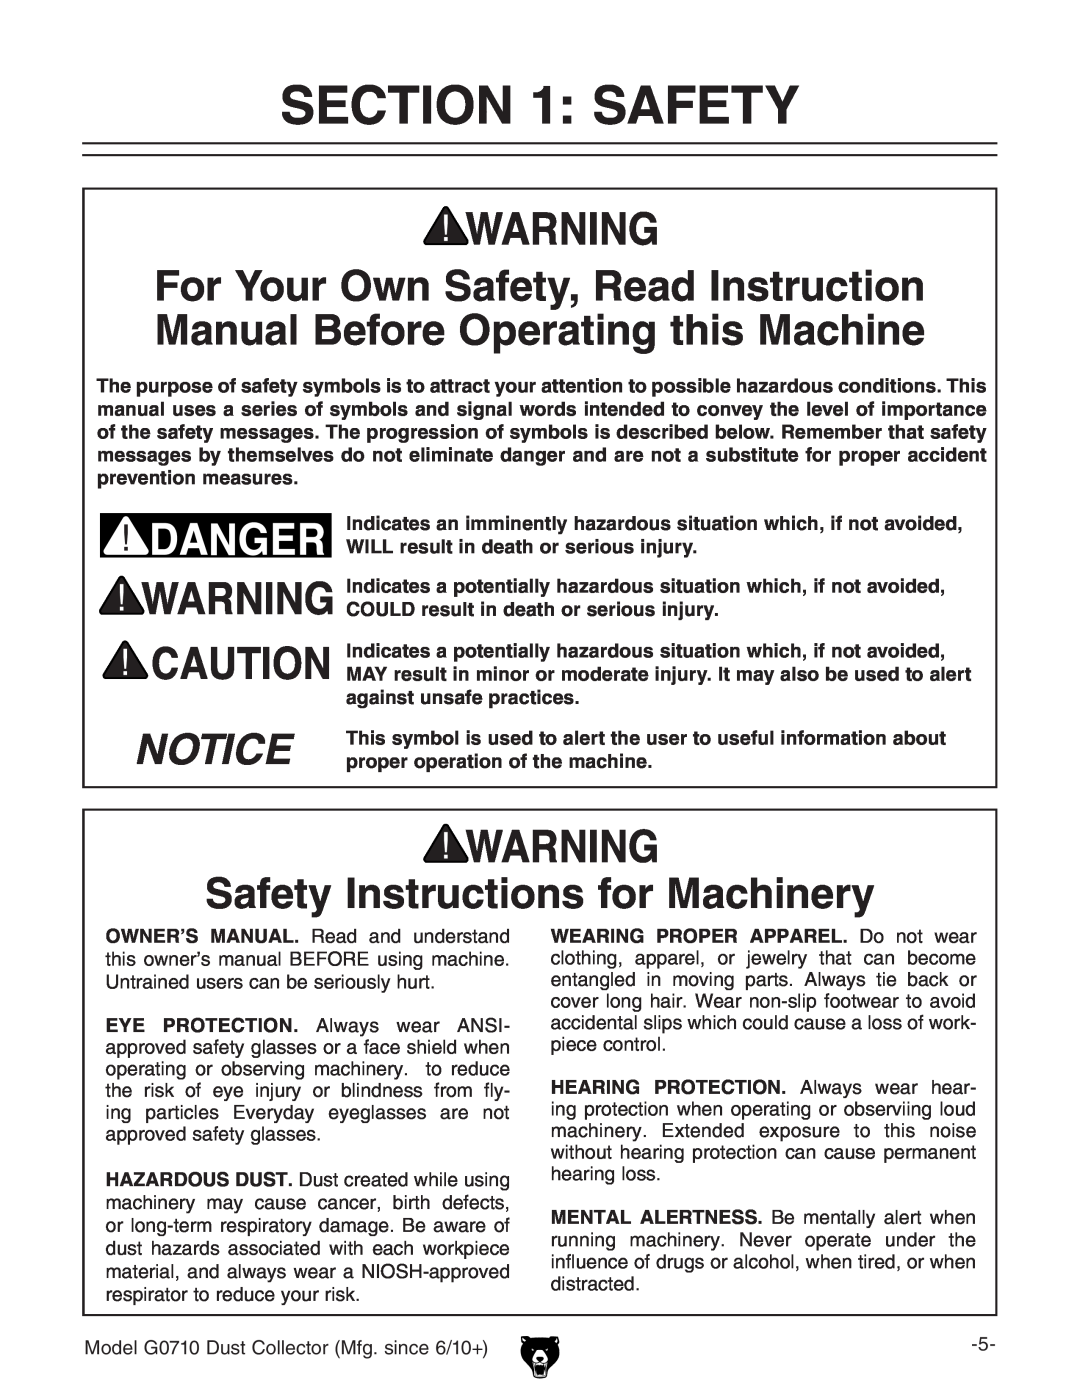 Grizzly G0710 Safety Instructions for Machinery, Indicates an imminently hazardous situation which, if not avoided 